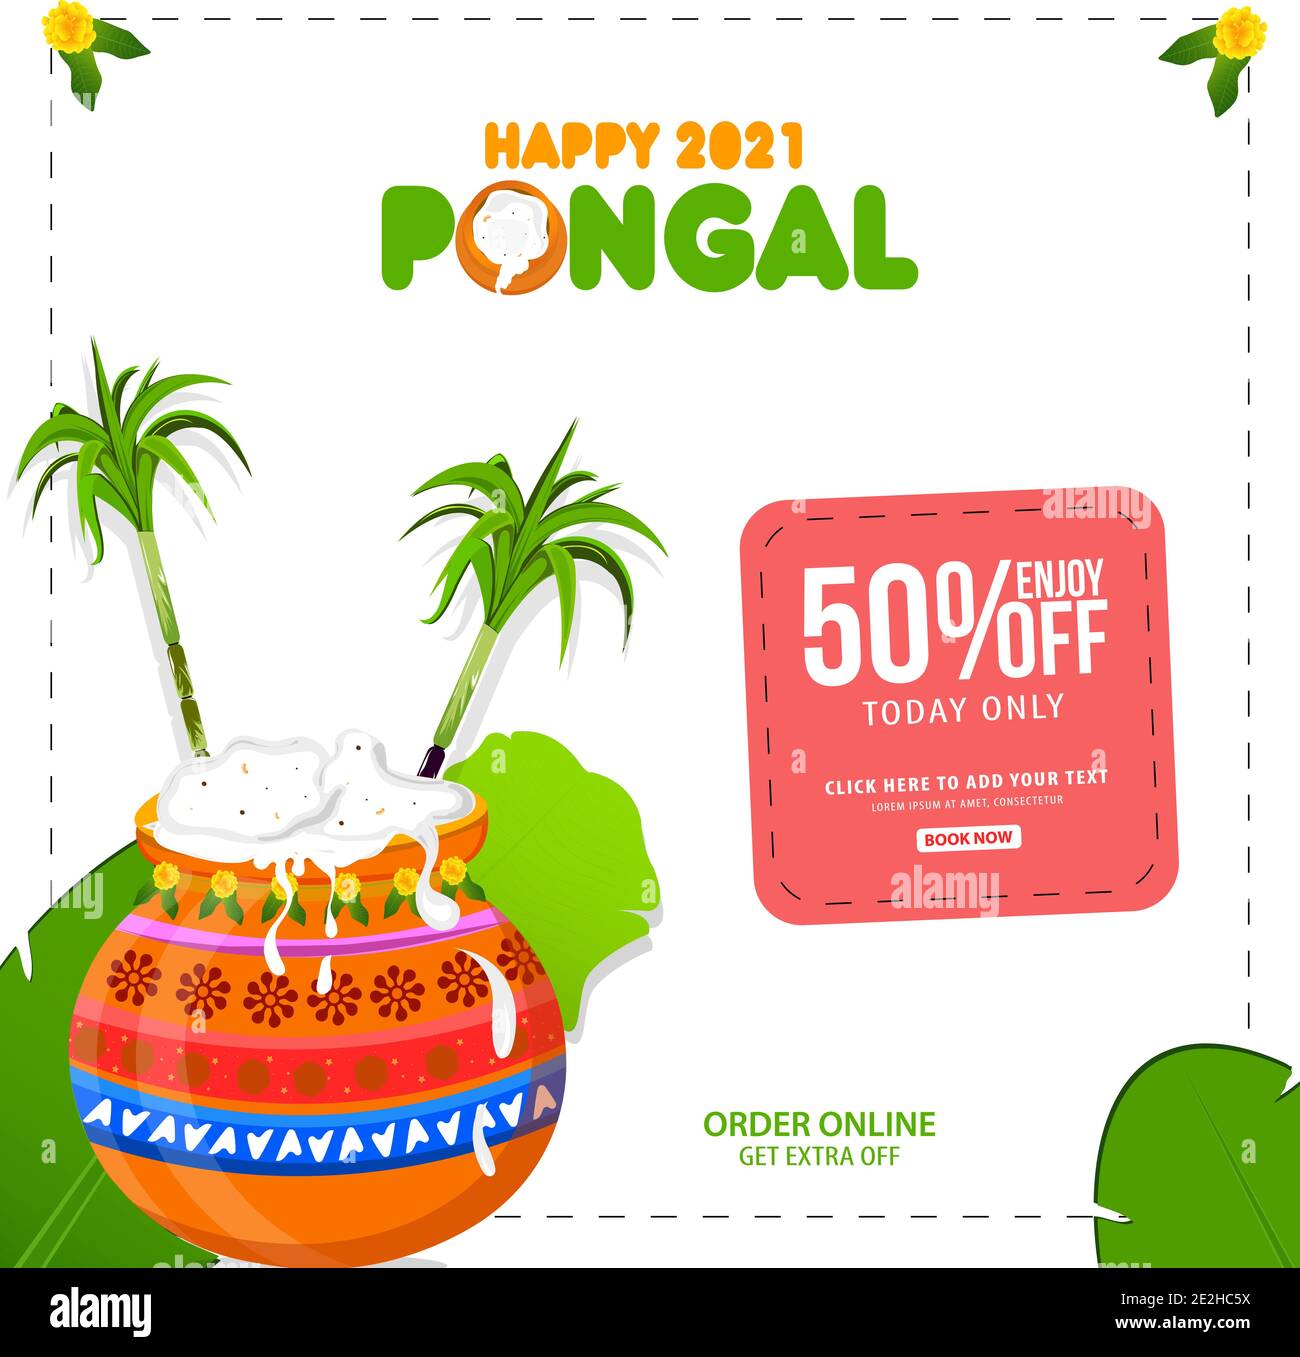 Pongal Festival Sale Template Design - Indian Religion Festival Pongal Background Template Stock Vector